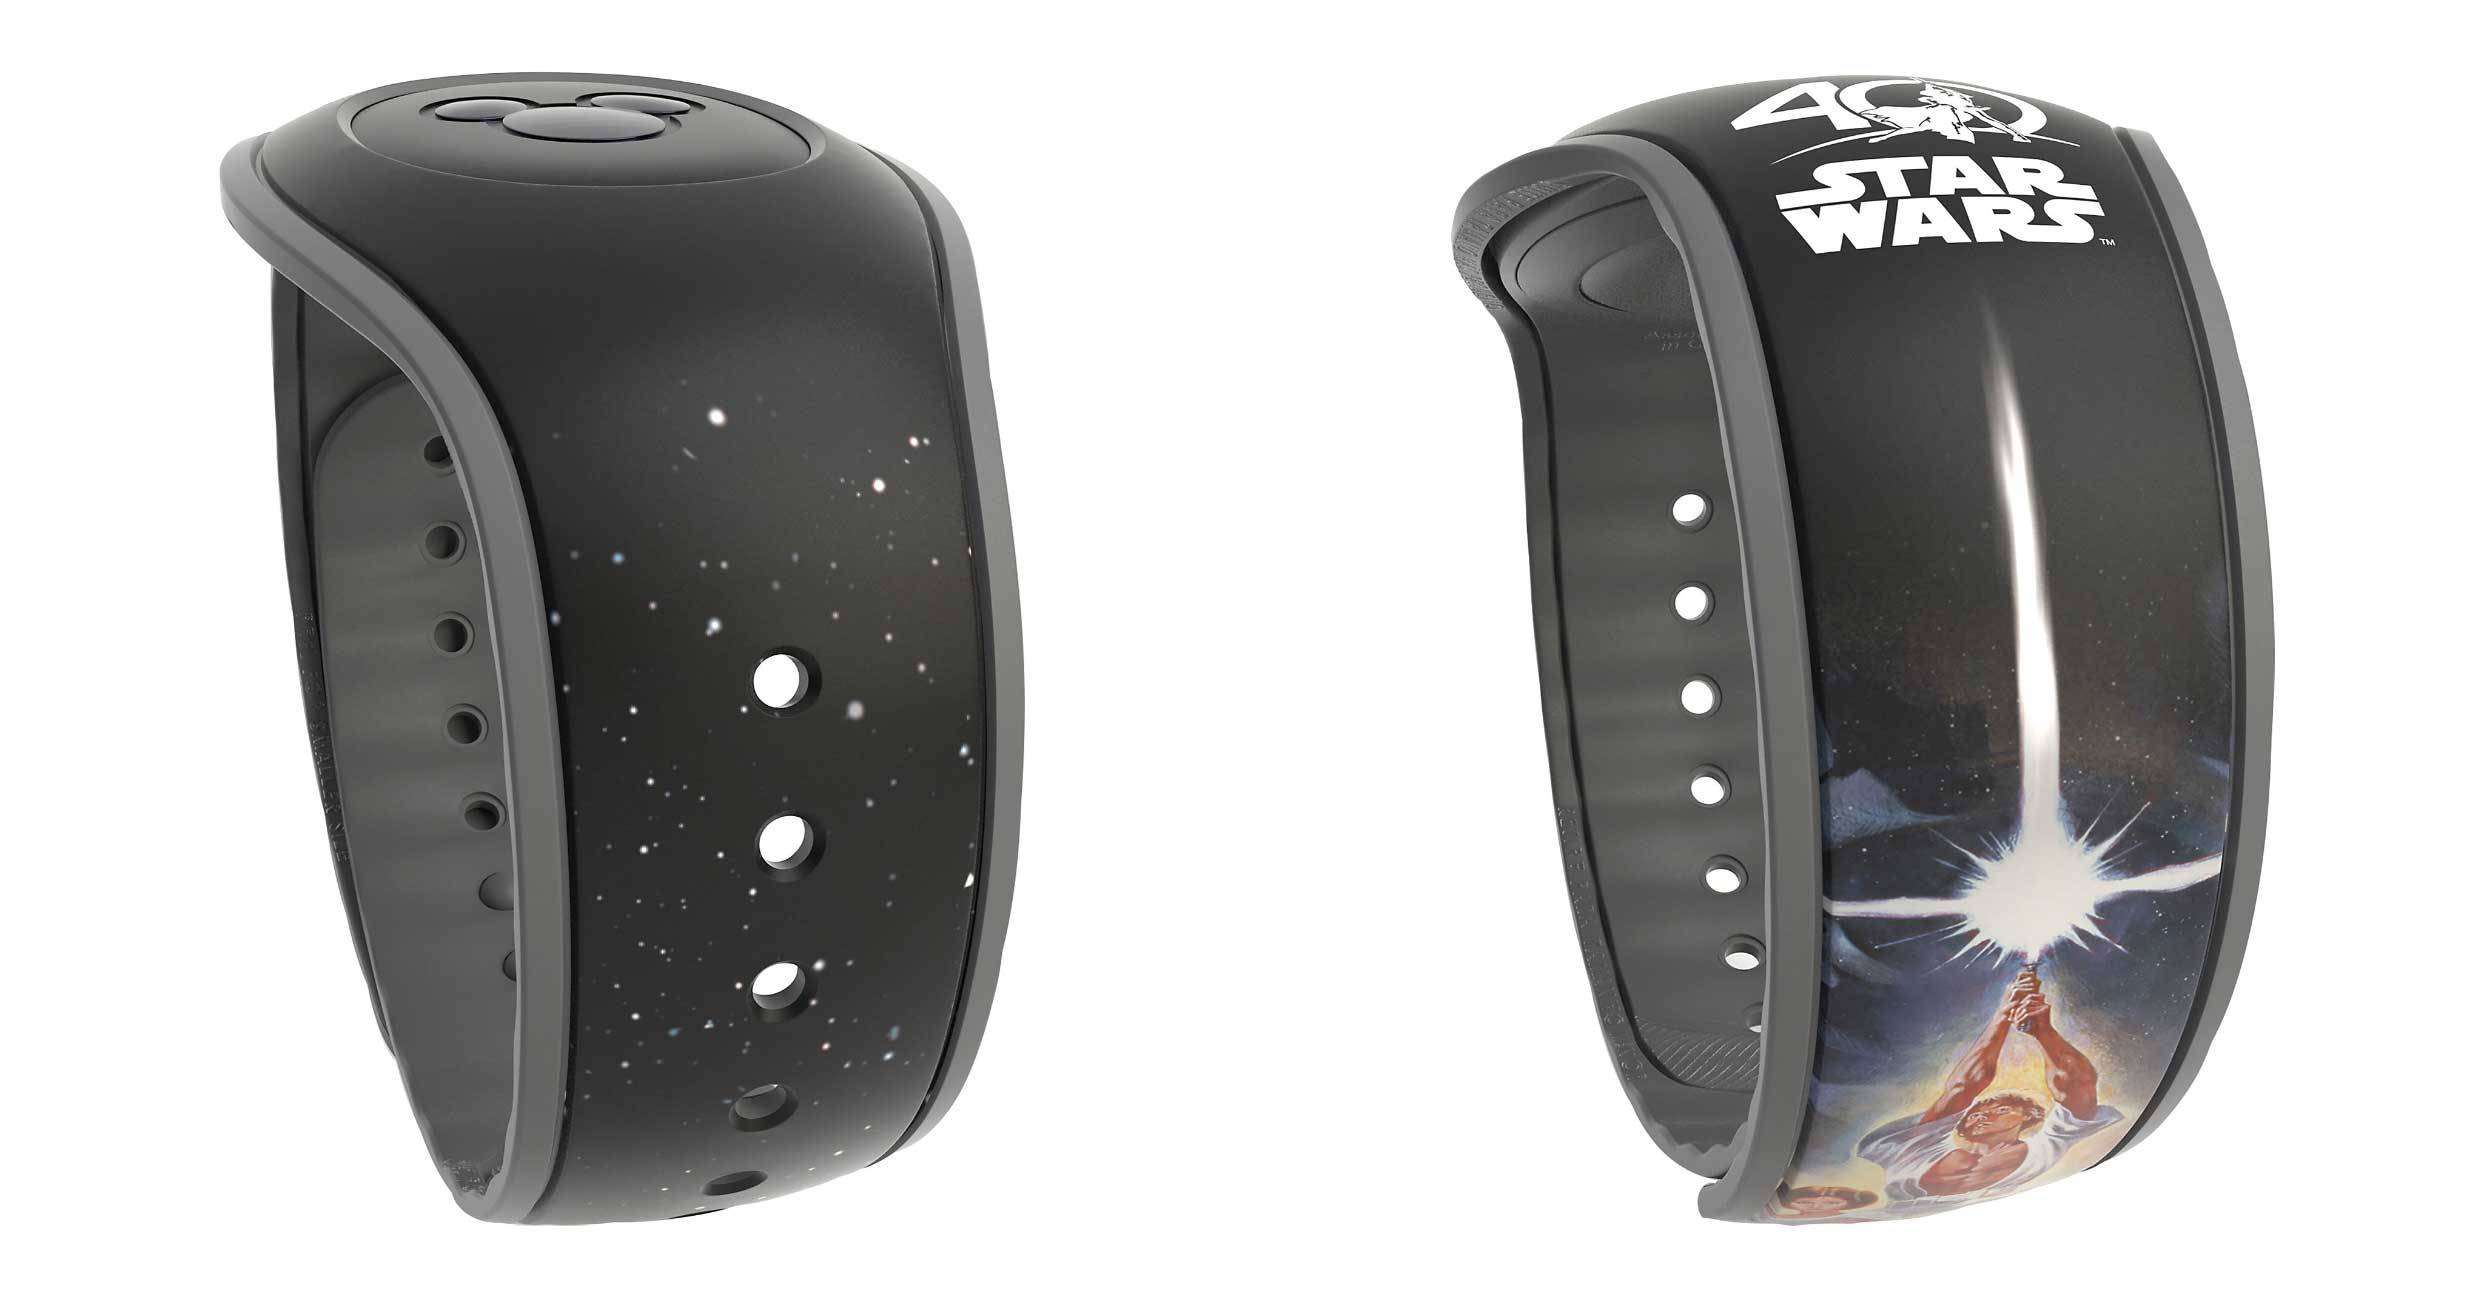 PHOTOS - New black and teal graphic MagicBands now available